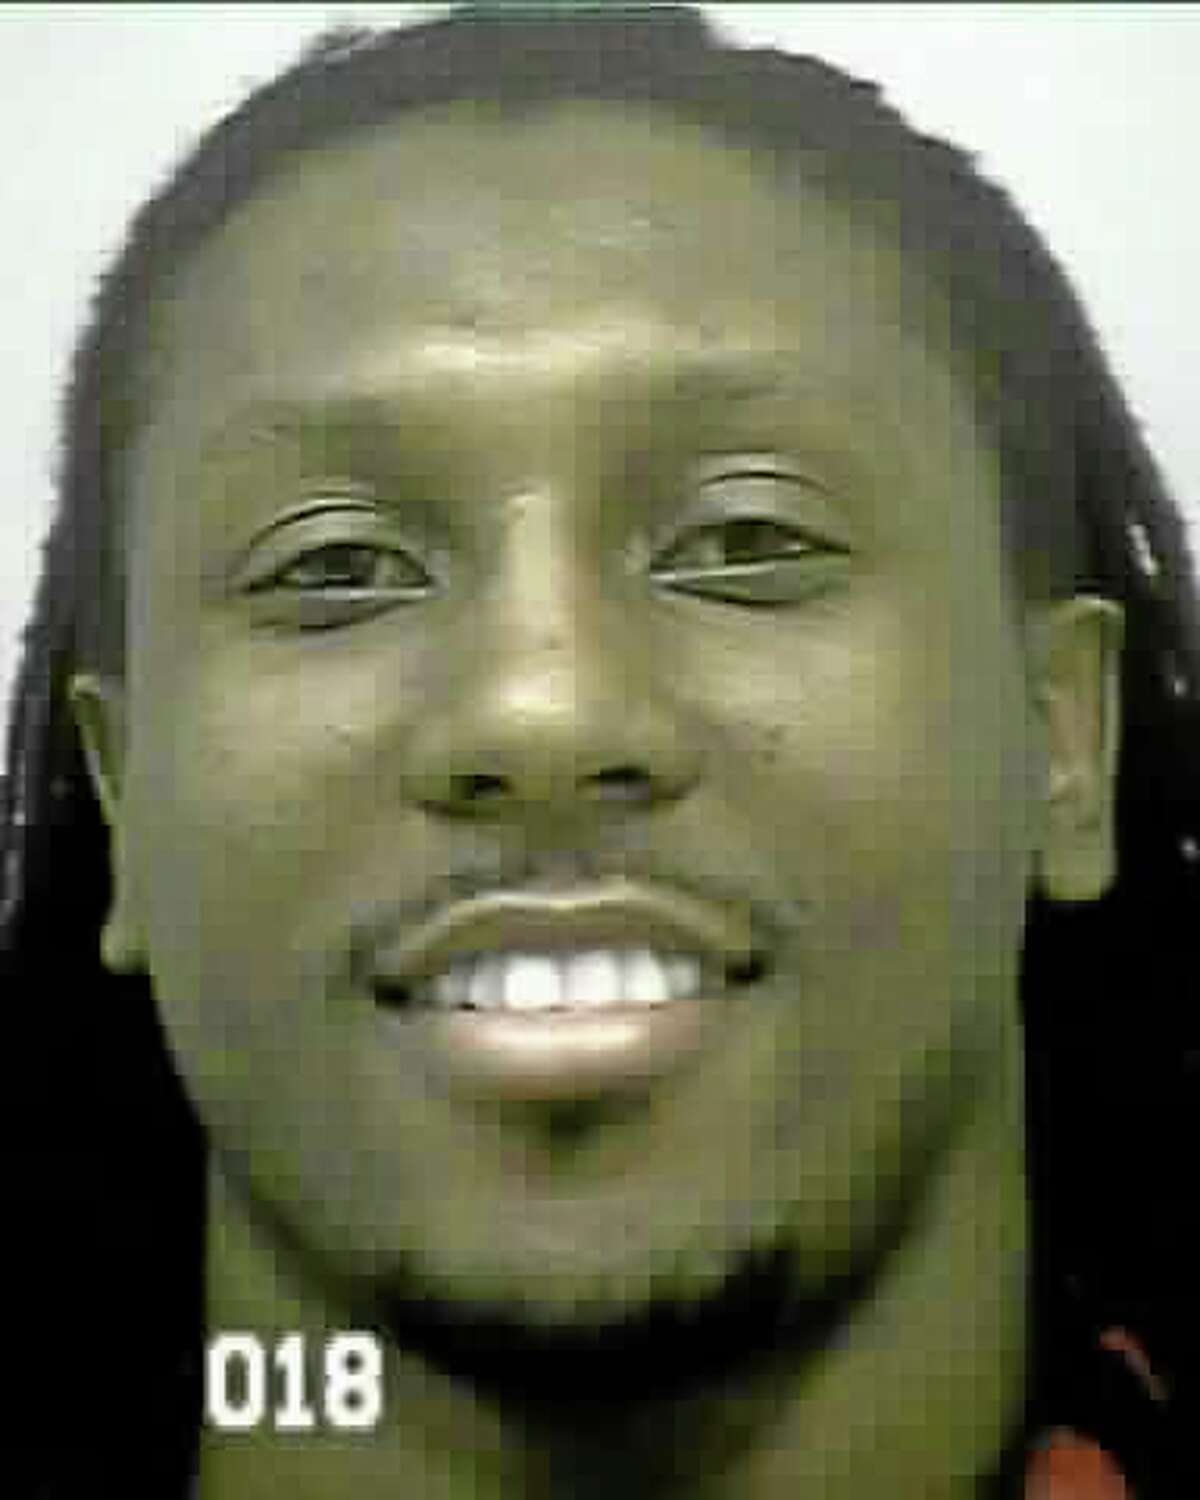 This booking photo provided by the Gwinnett County Sheriff’s Department shows Atlanta Falcons receiver Roddy White, who was arrested on a warrant charging him with failing to appear in court. Gwinnett County sheriff’s Deputy Shannon Volkodav confirmed White was booked at the jail in that Atlanta suburb early Tuesday. Jail records show he was released about an hour later after posting $168 bond.